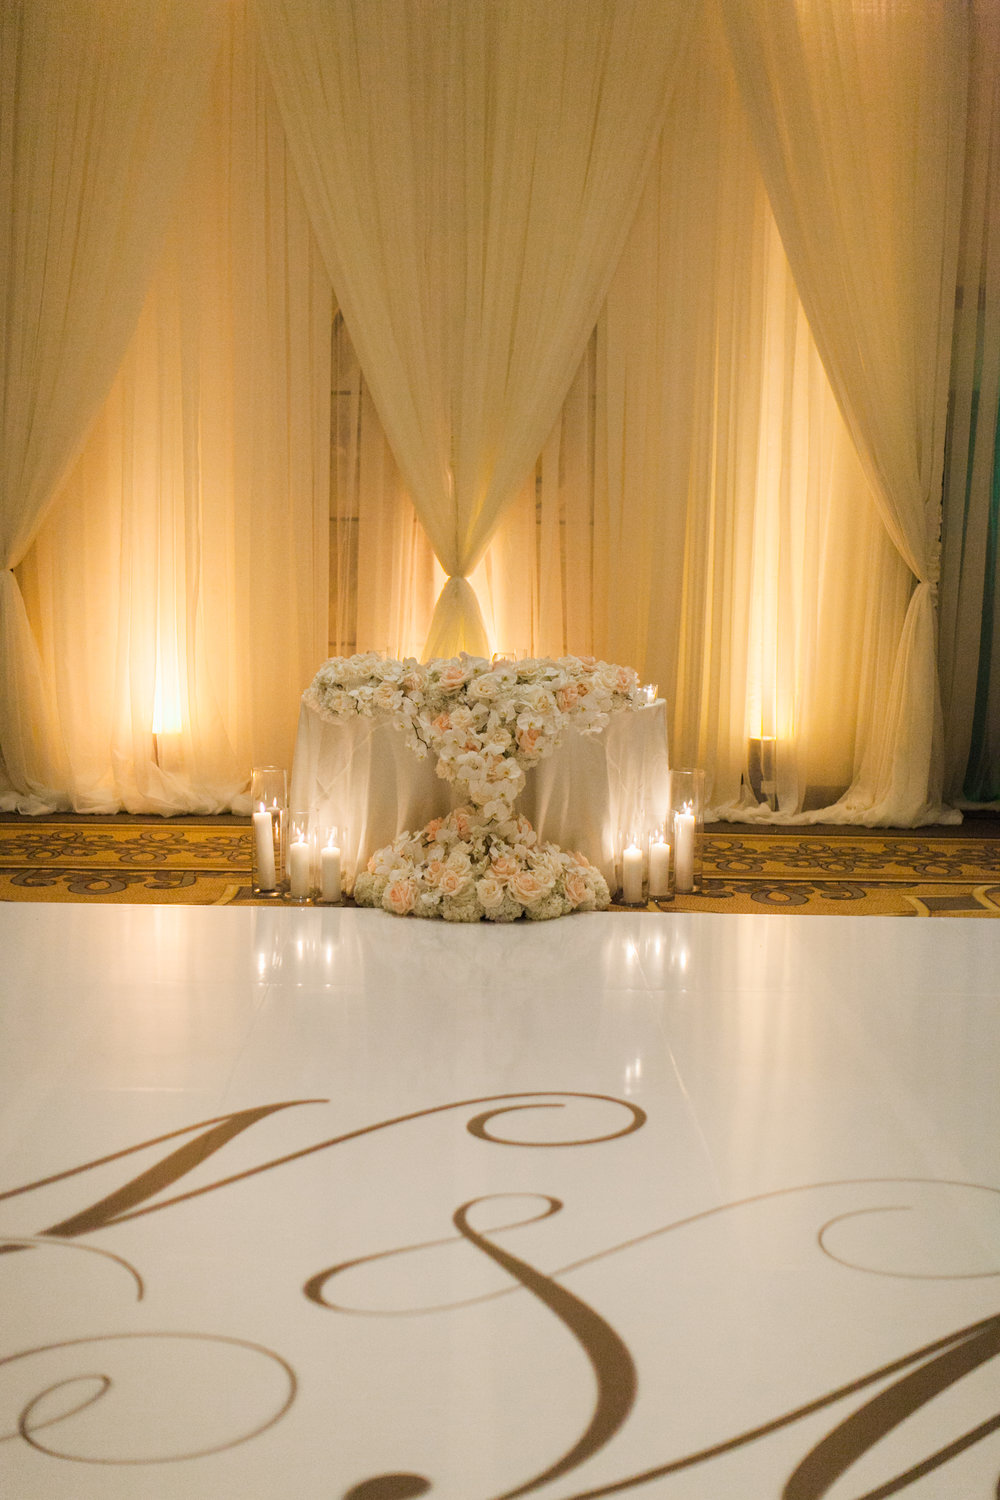 Custom dance floor with the bride and groom's initials mixed with extravagant draping